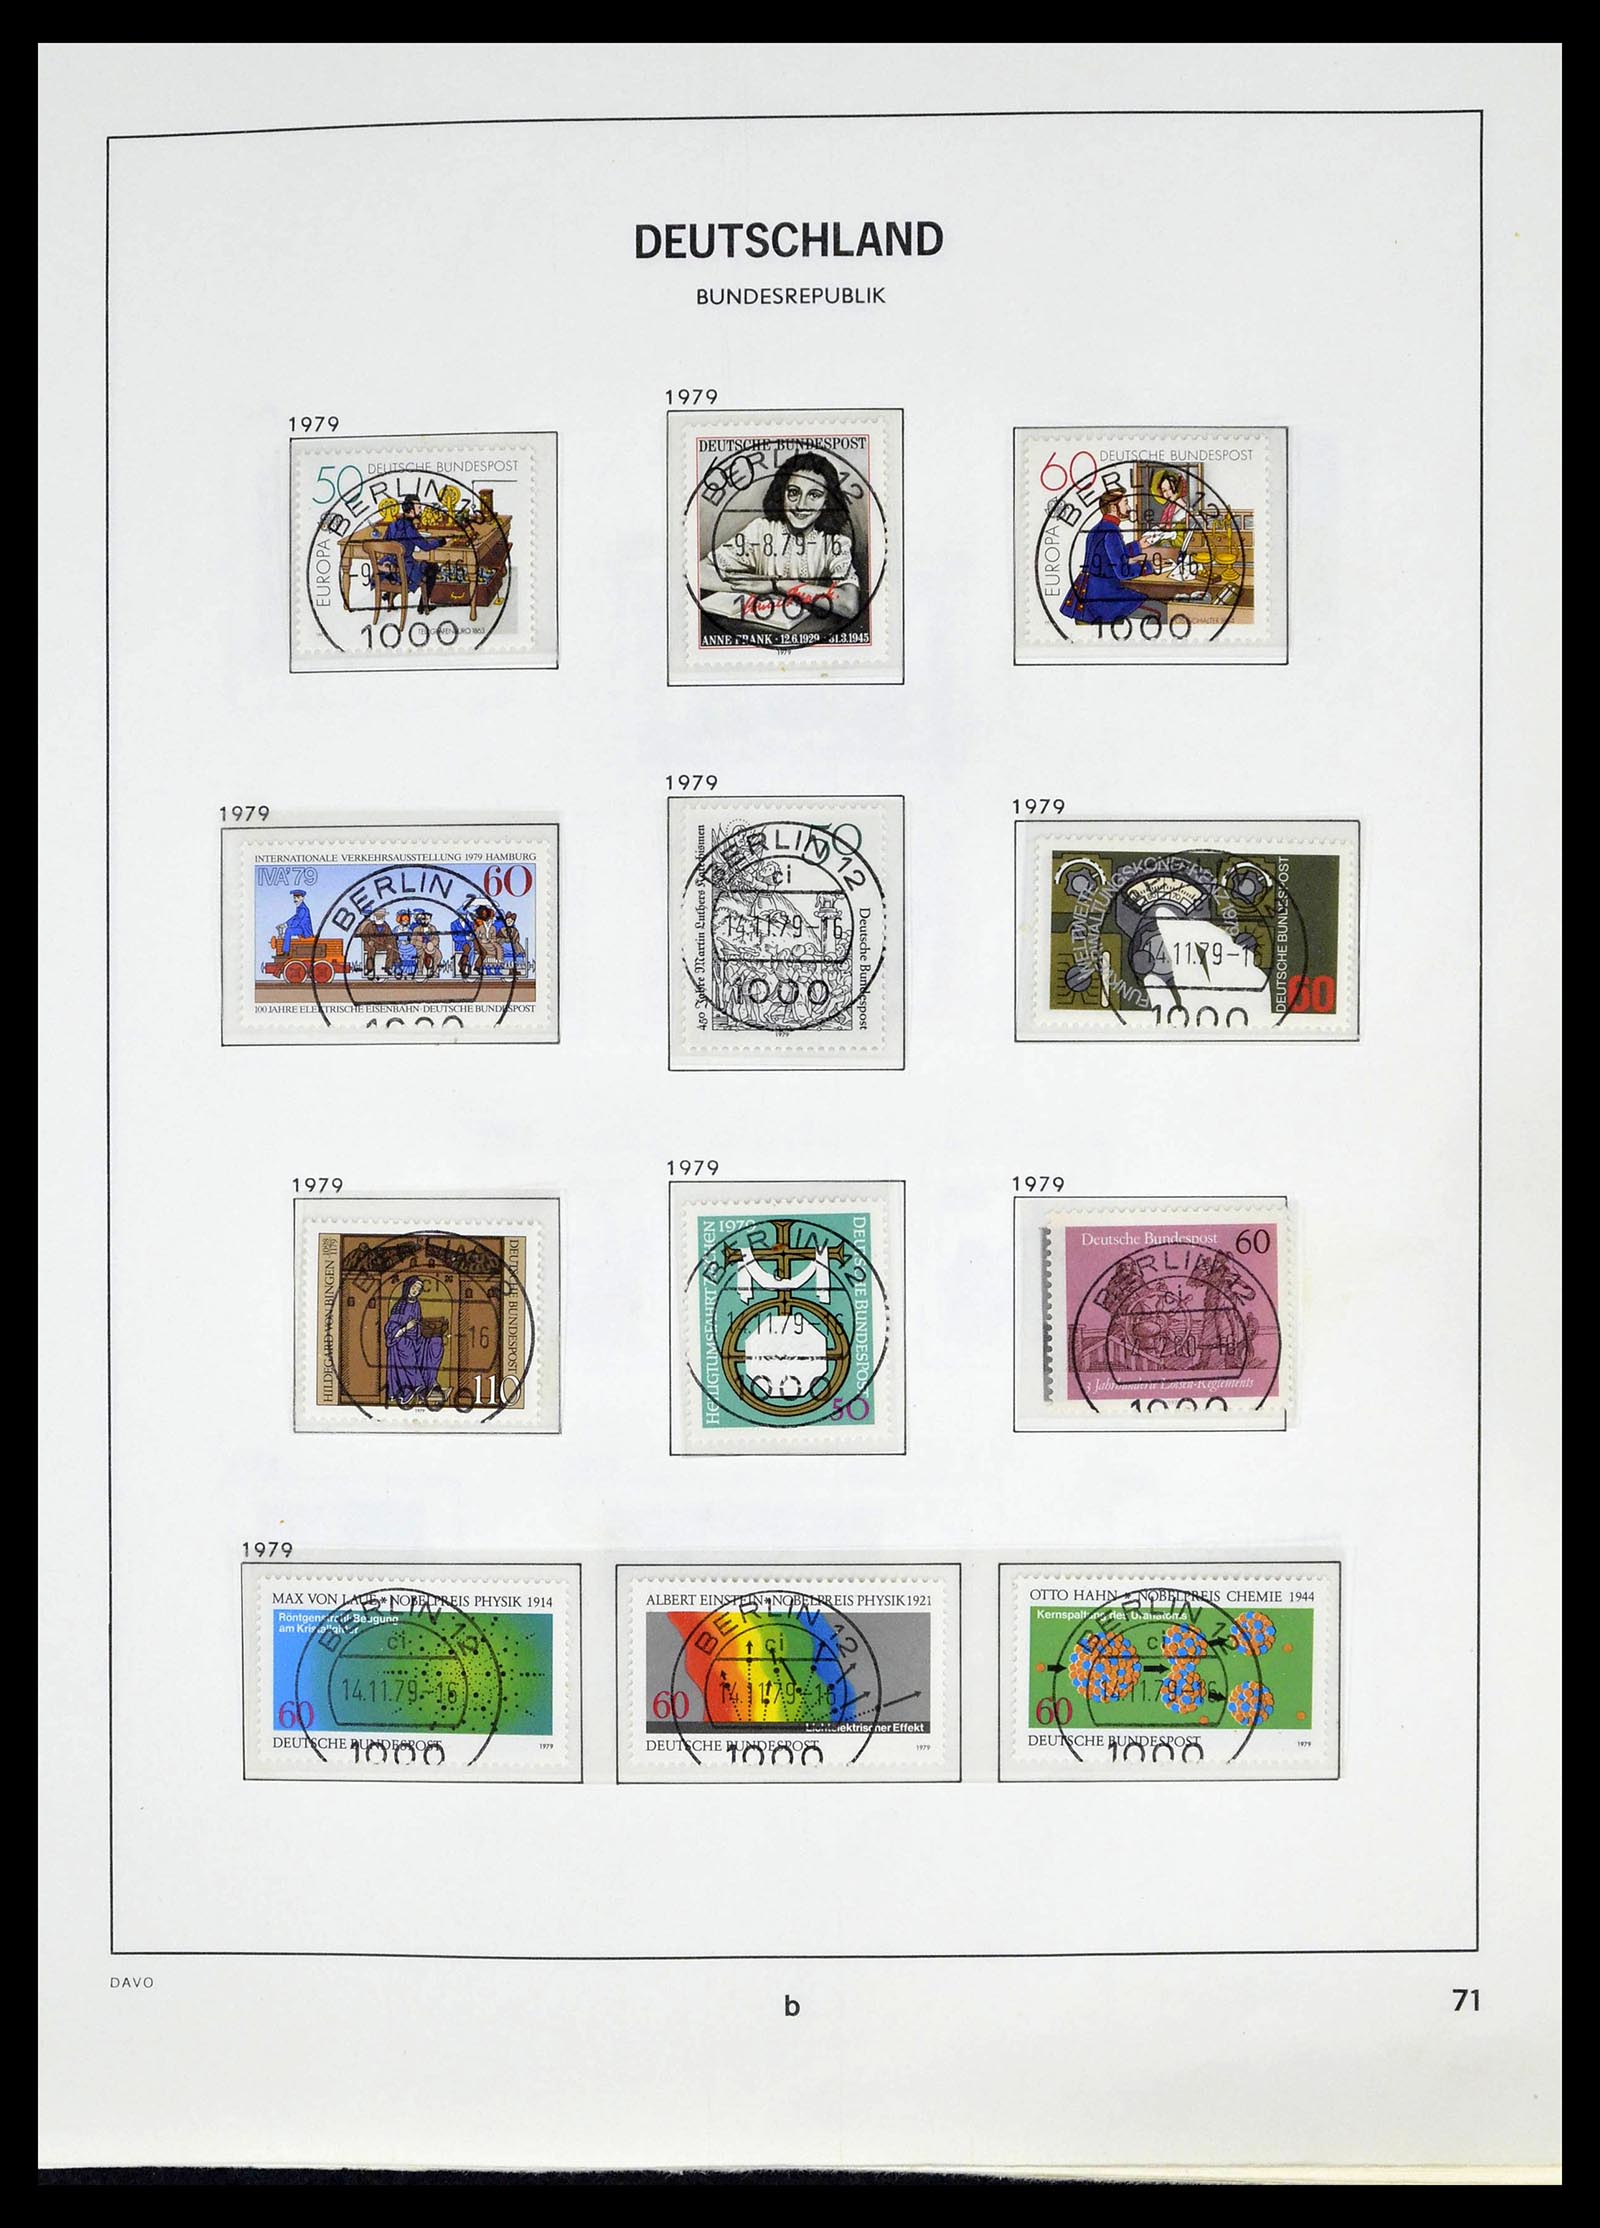 39326 0074 - Stamp collection 39326 Bundespost 1949-2003.